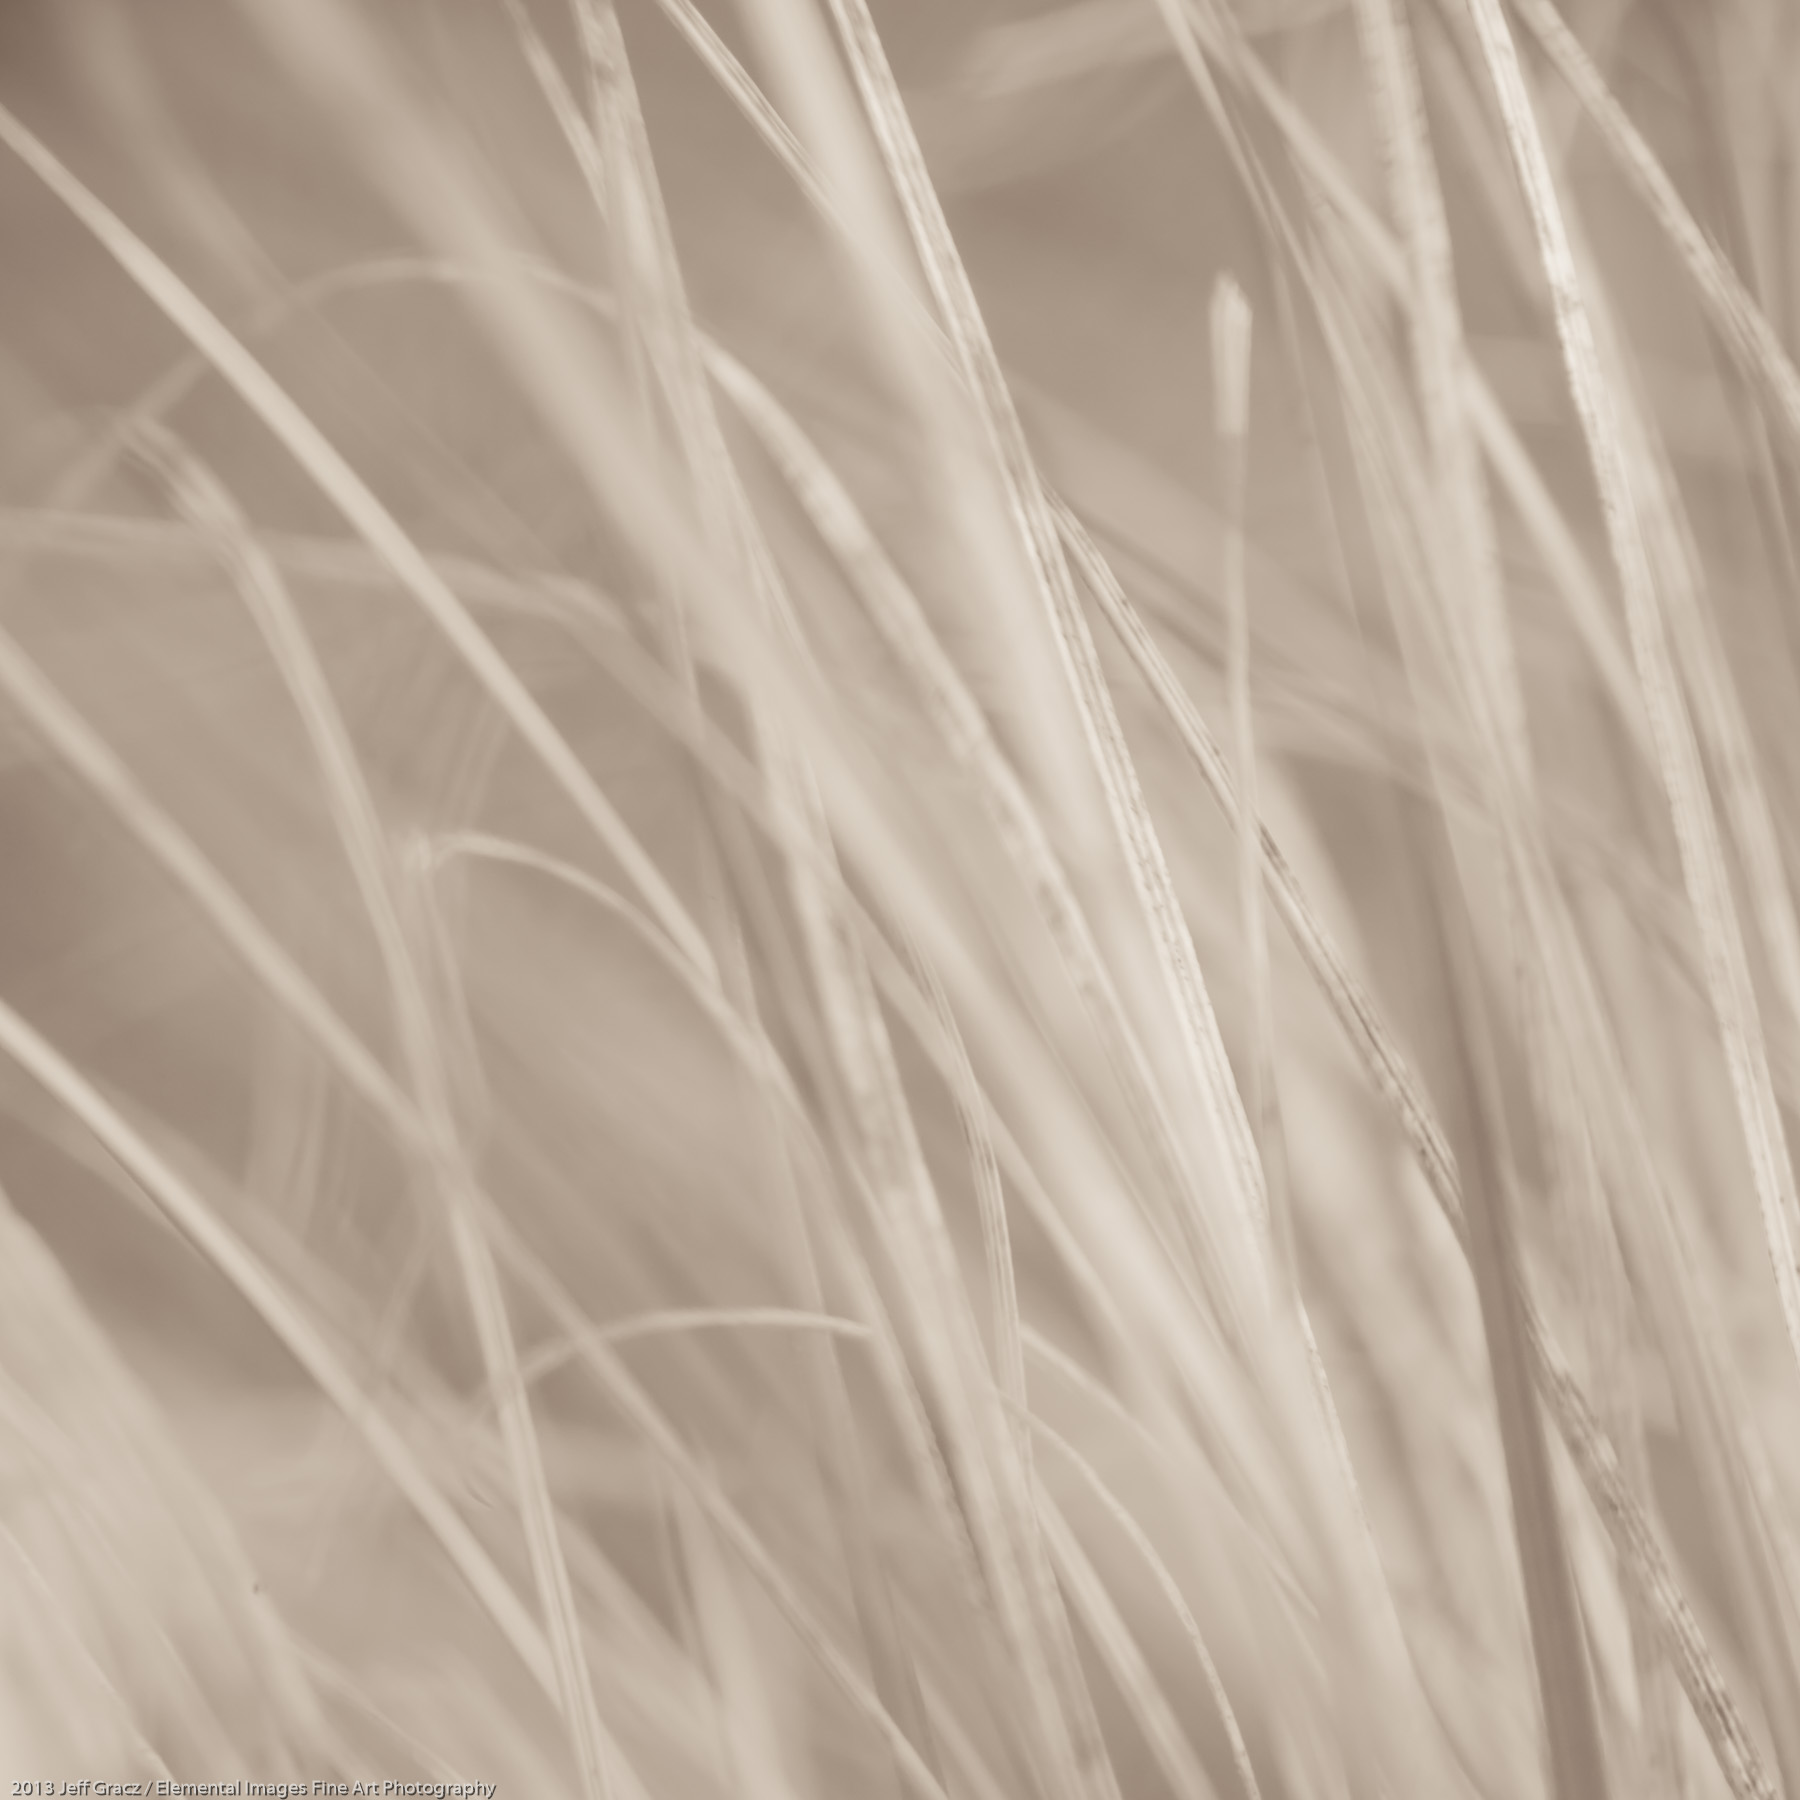 Grasses XXXV | Portland | OR | USA - © 2013 Jeff Gracz / Elemental Images Fine Art Photography - All Rights Reserved Worldwide